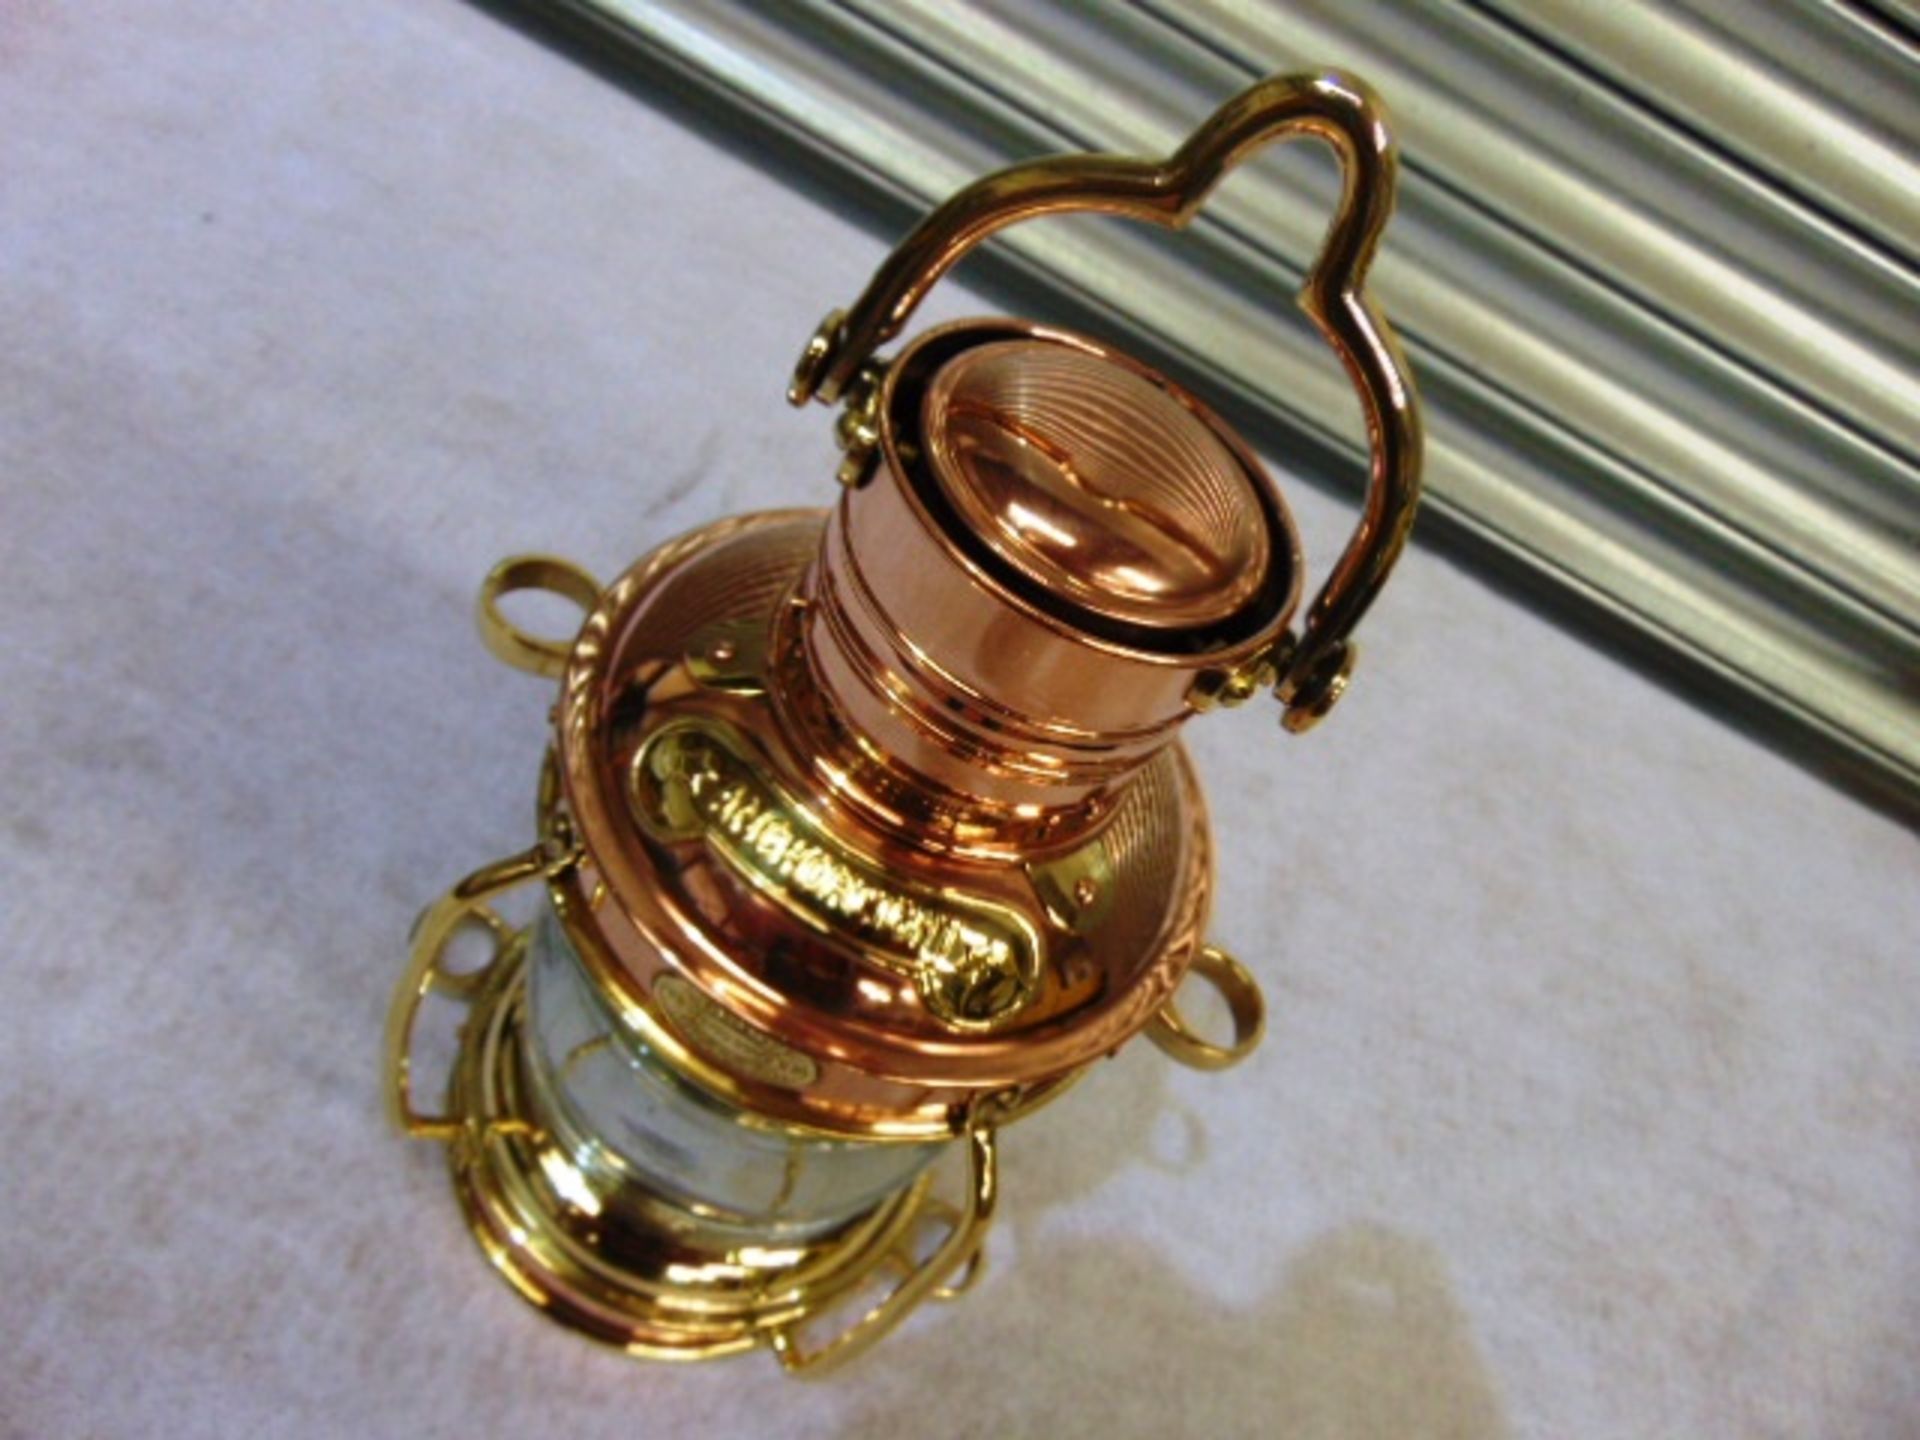 Stunning Brass and Copper Anchor Lamp - Image 2 of 5